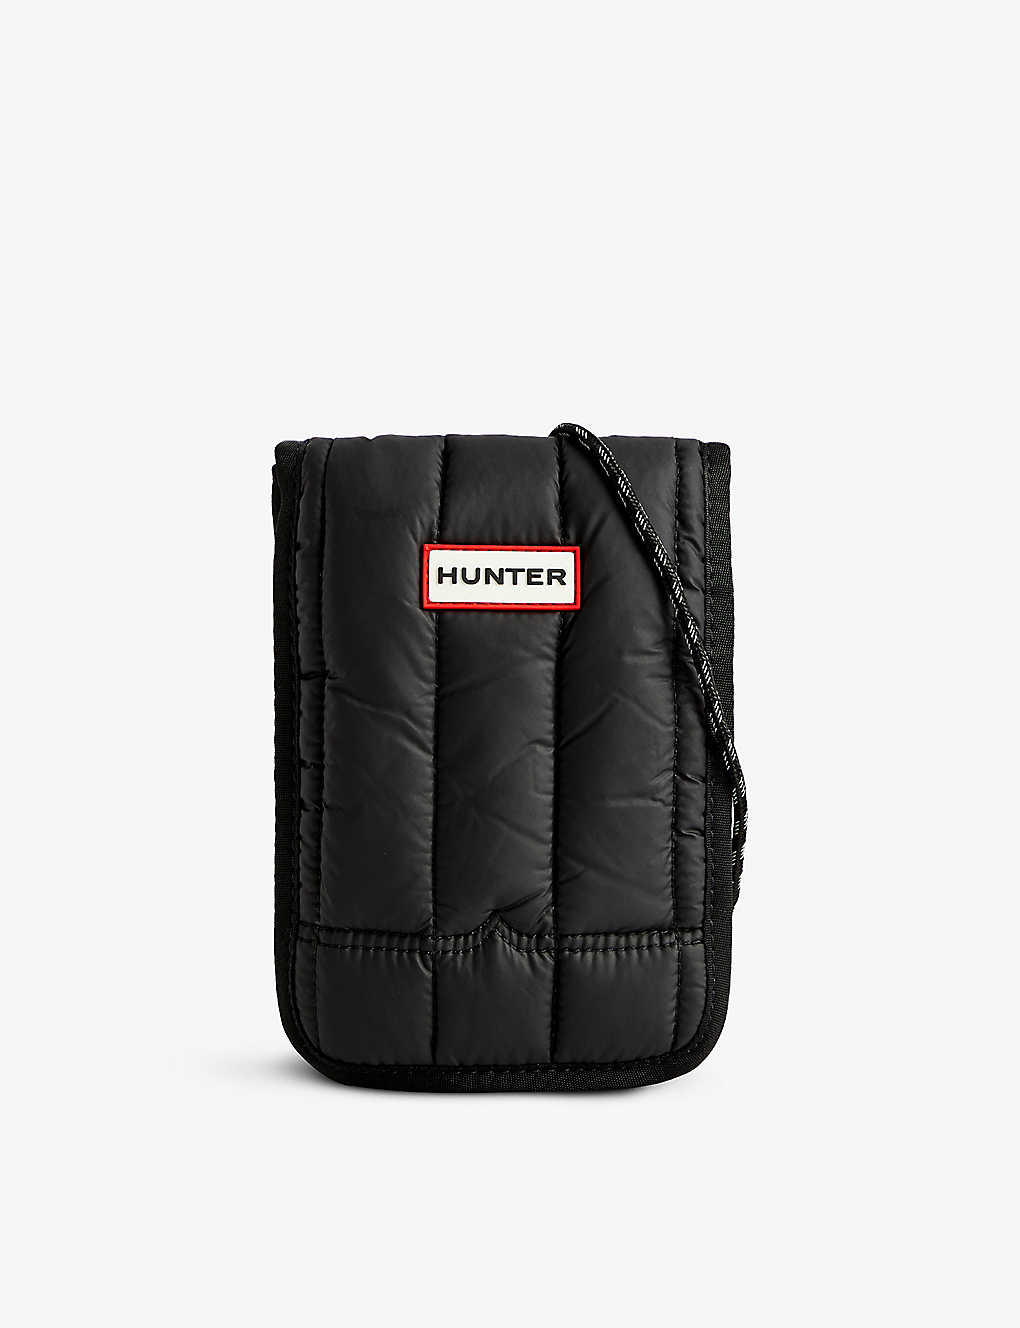 Hunter Intrepid Puffer Shell Pouch Bag In Black/red Box Logo